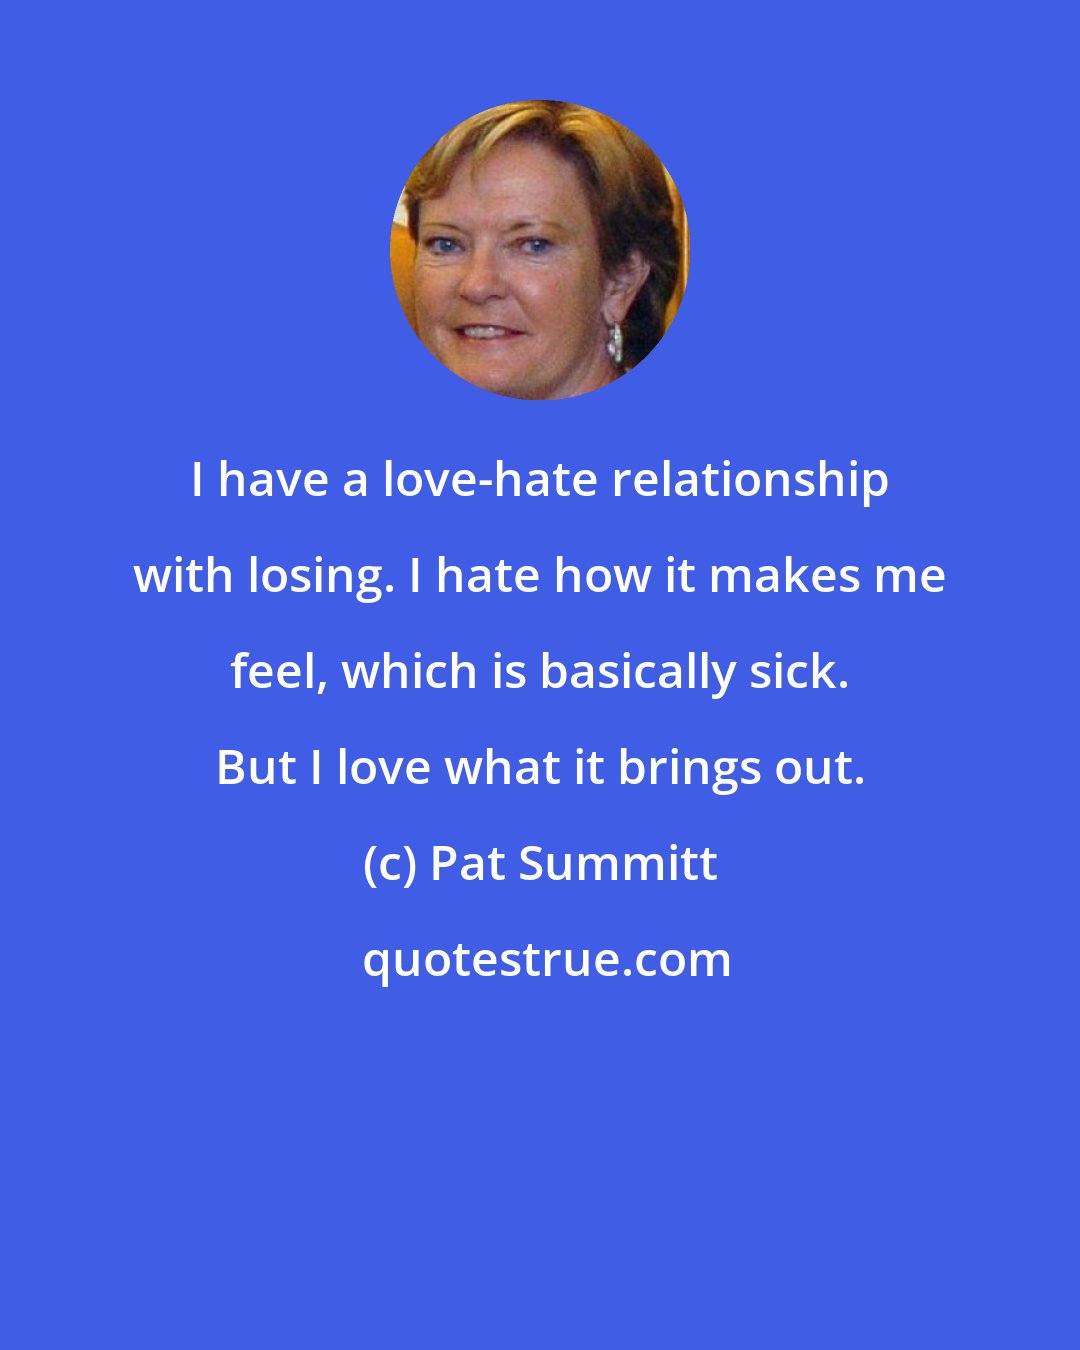 Pat Summitt: I have a love-hate relationship with losing. I hate how it makes me feel, which is basically sick. But I love what it brings out.